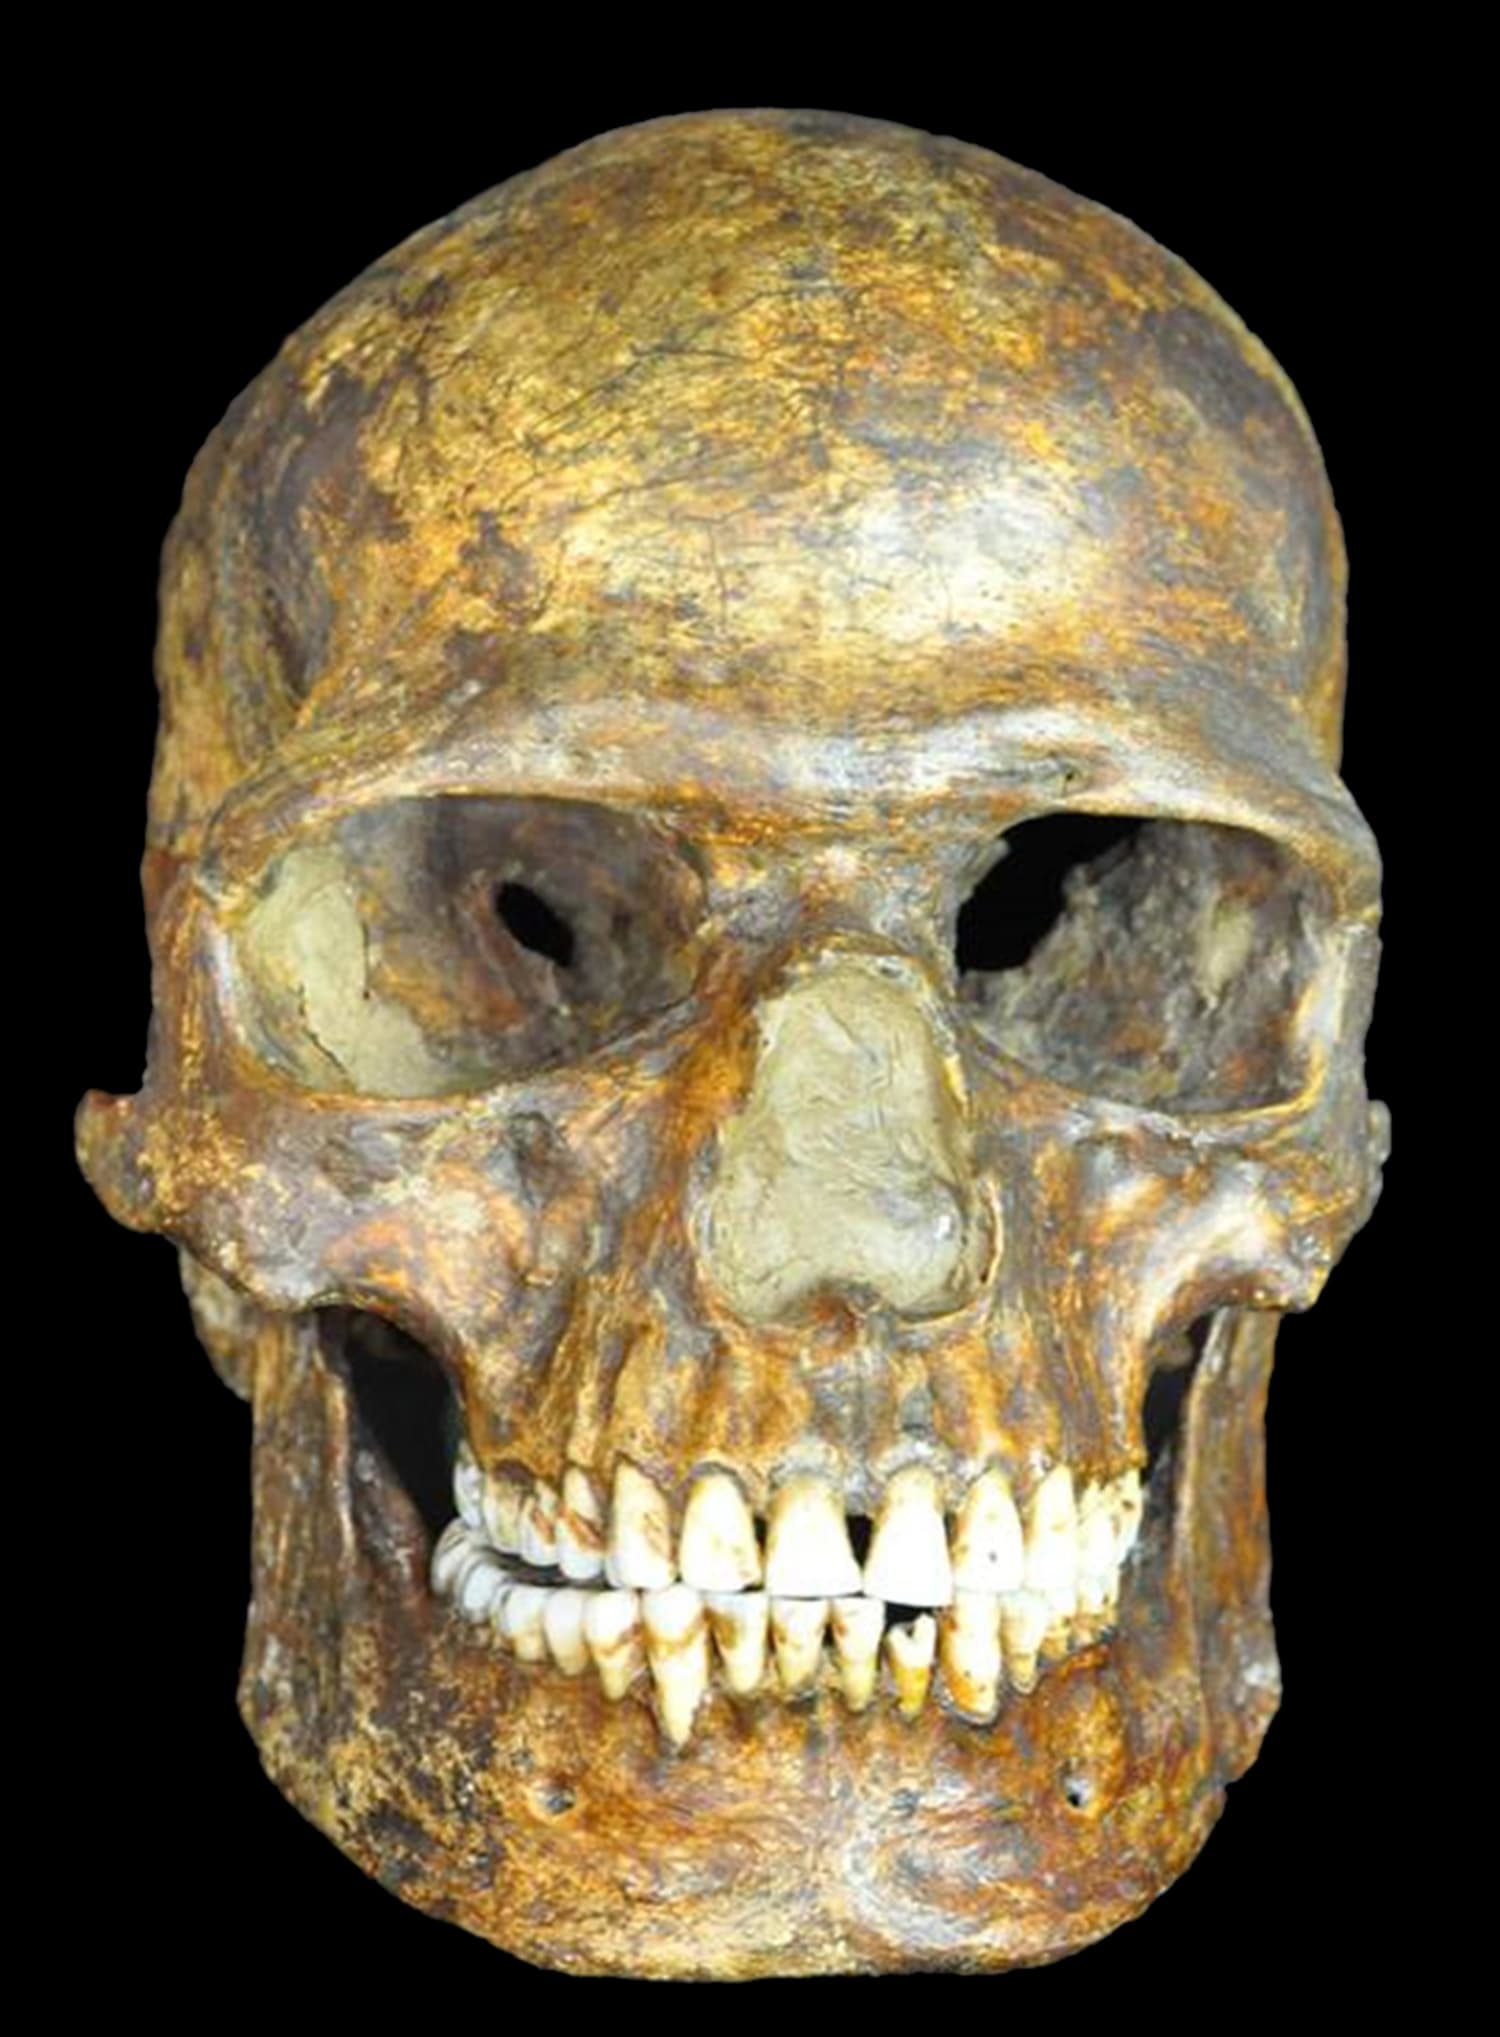 neanderthals and humans interbred